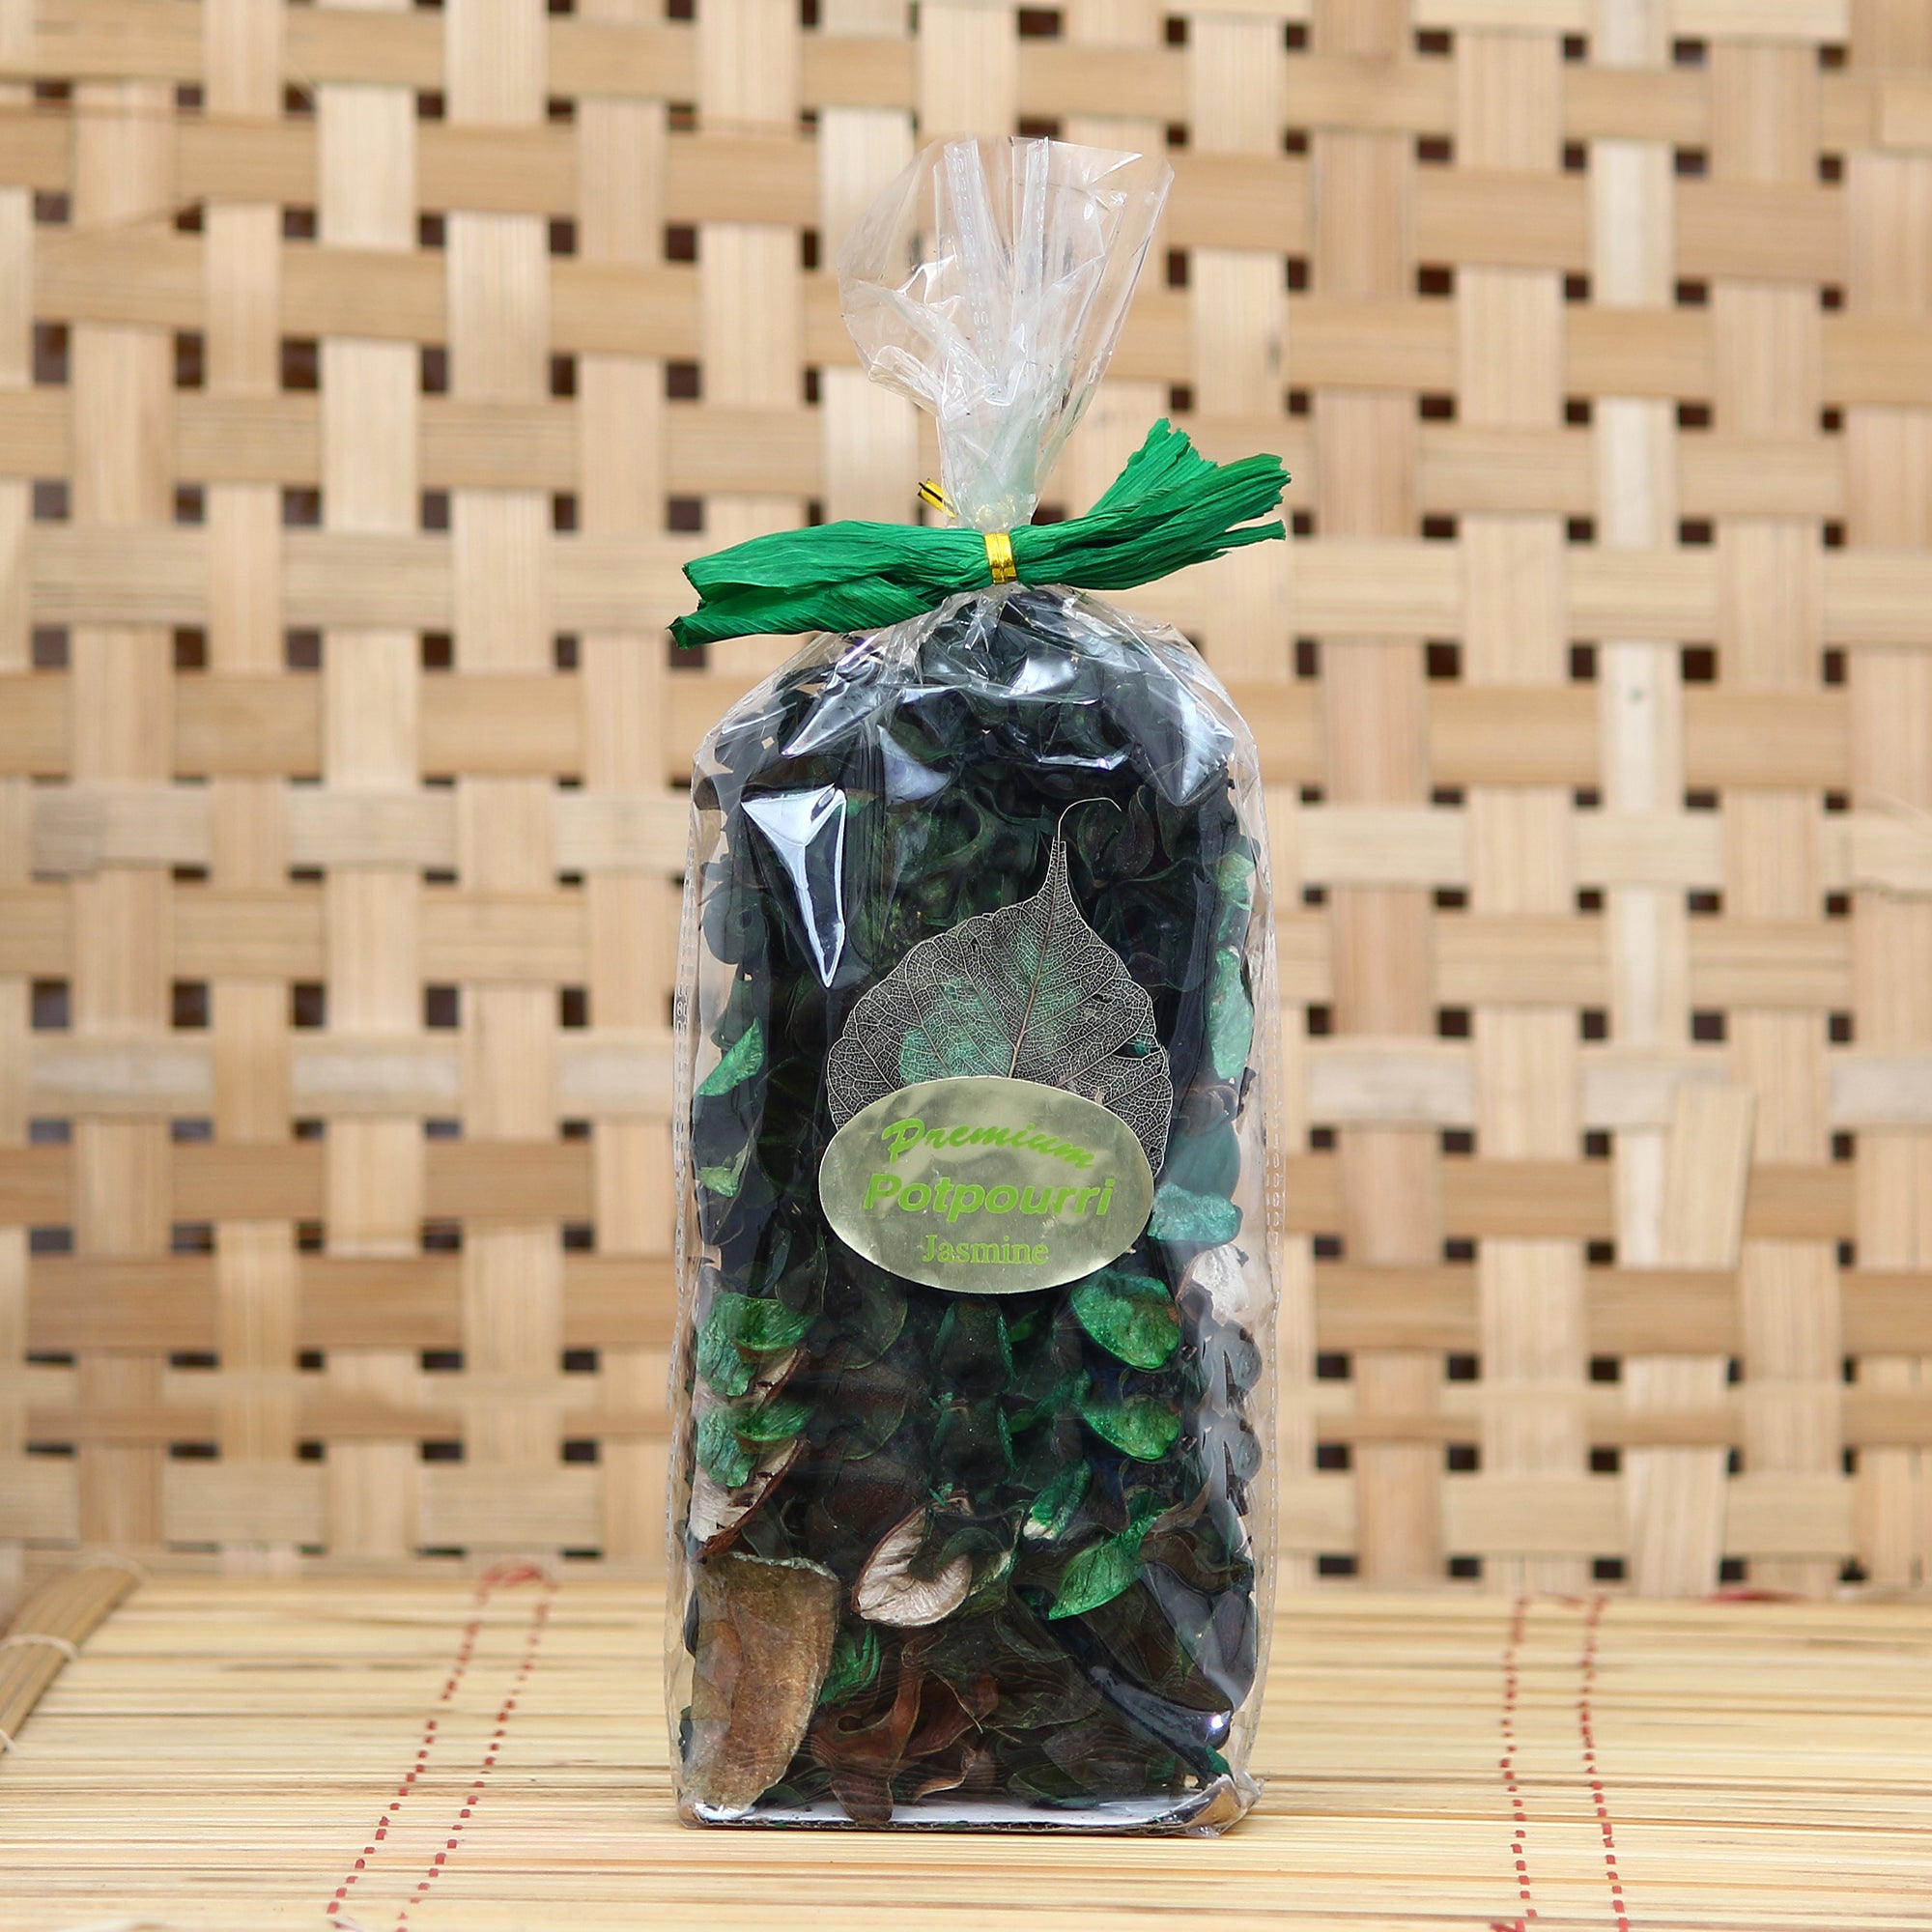 Green Petals Potpourri with Jasmine Fragrance for Multipurpose use as Home Decor